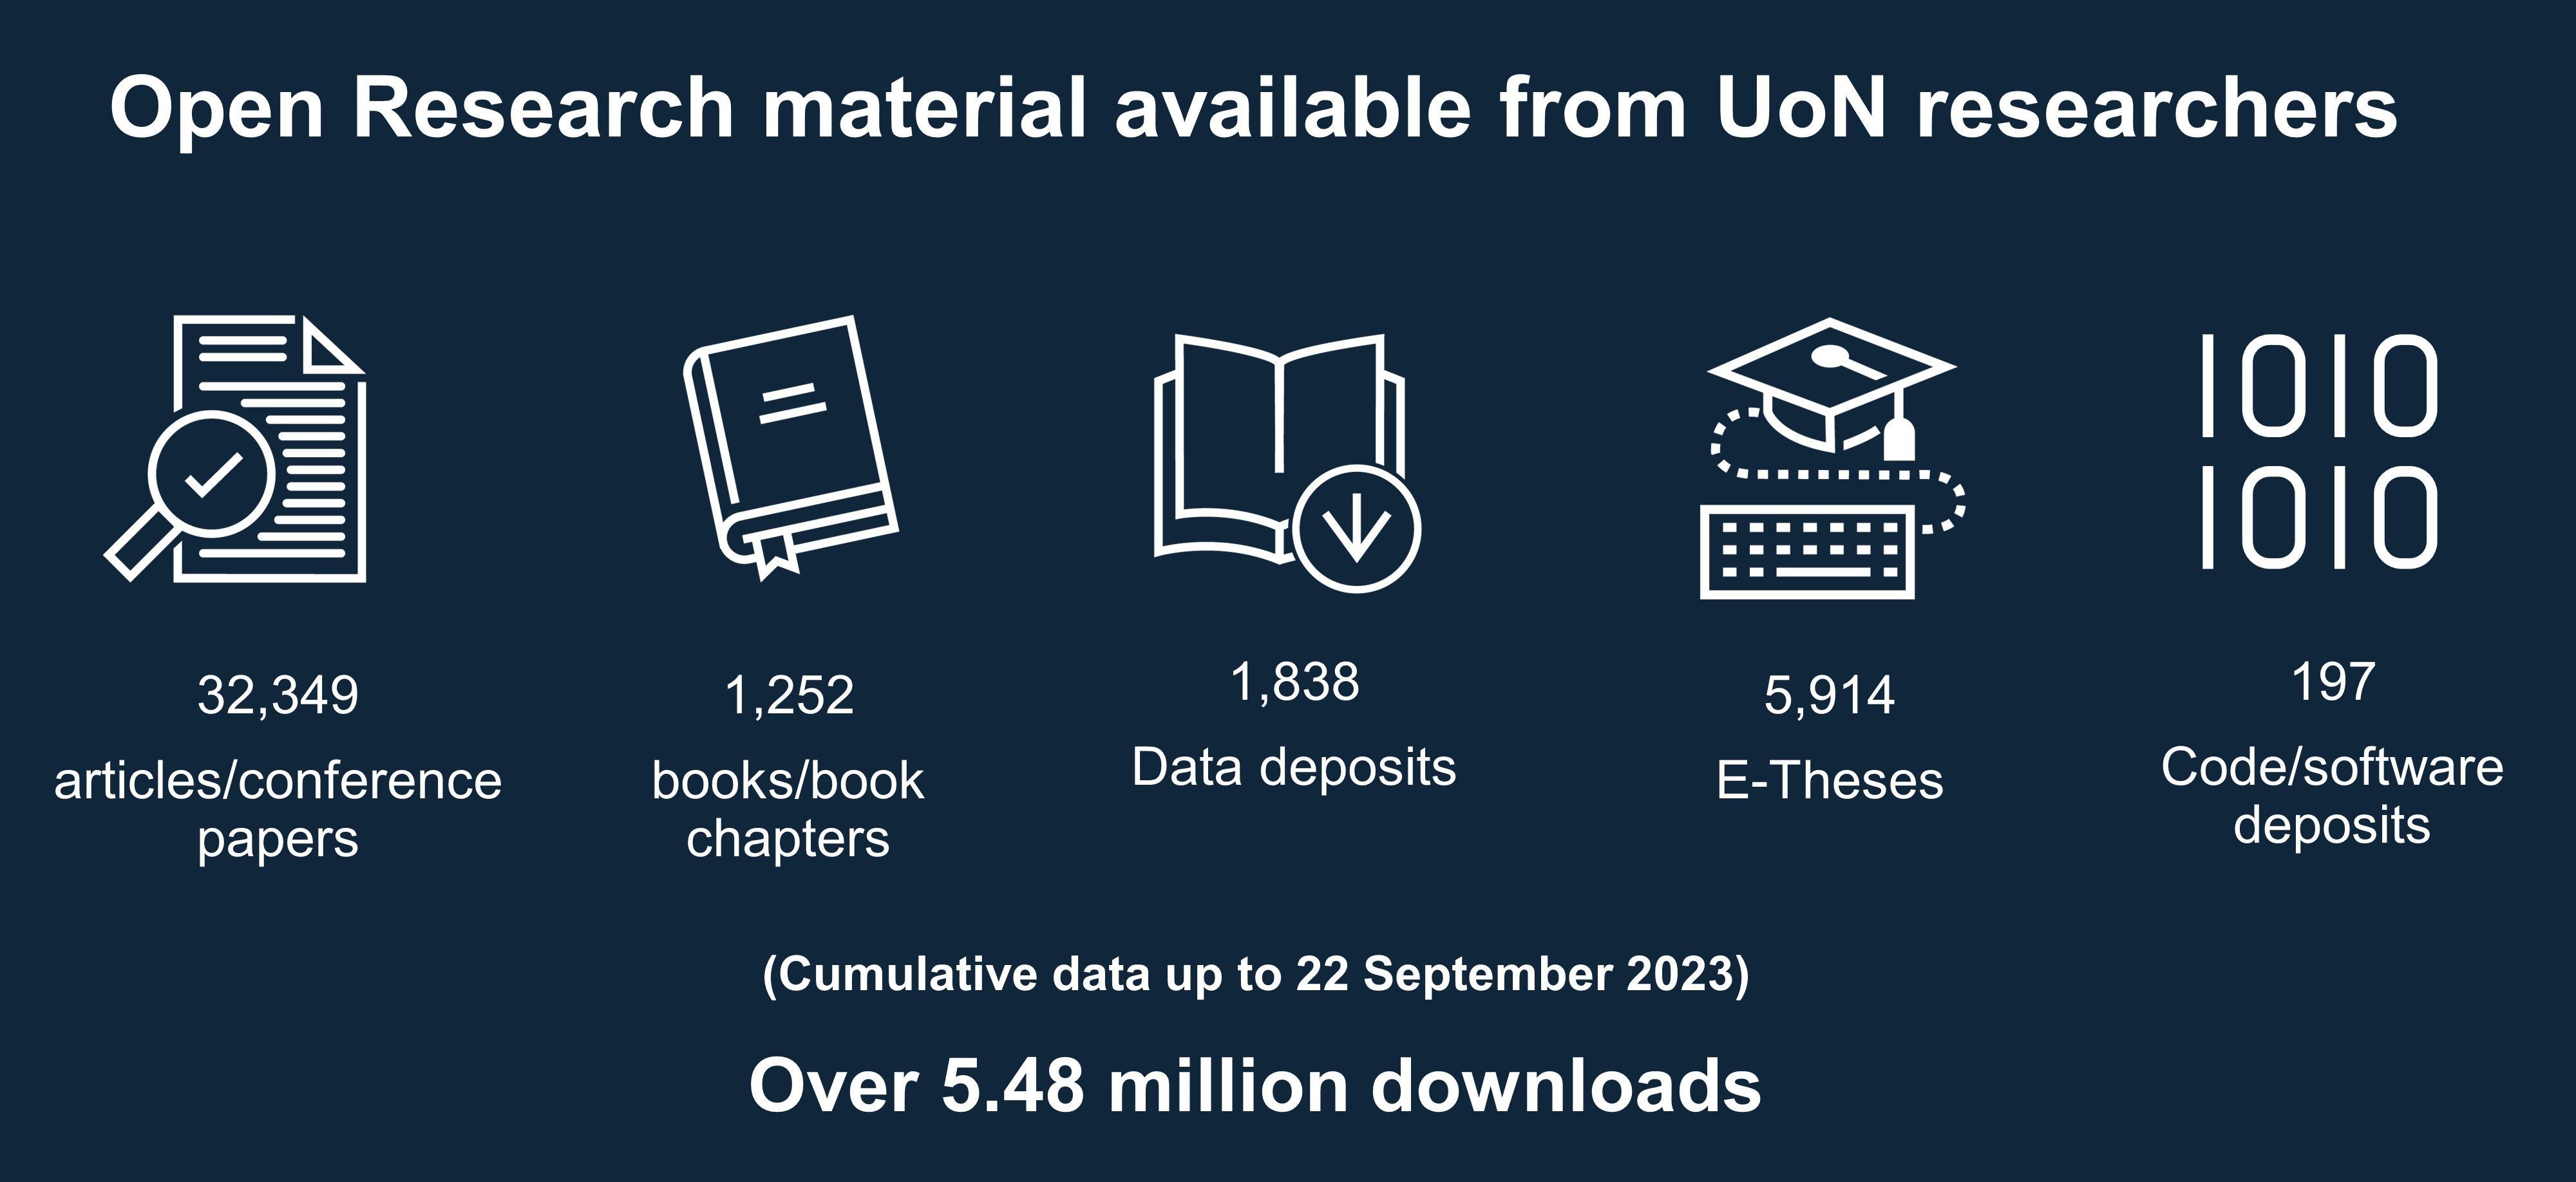 Open Research material available from UoN researchers  Articles/conference papers 32,349. Books/book chapters 1,252. Data deposits 1838. e-theses 5914. Code software deposits 197. Data up to 22 September 2023. Over 5.48 million outputs have been downloaded